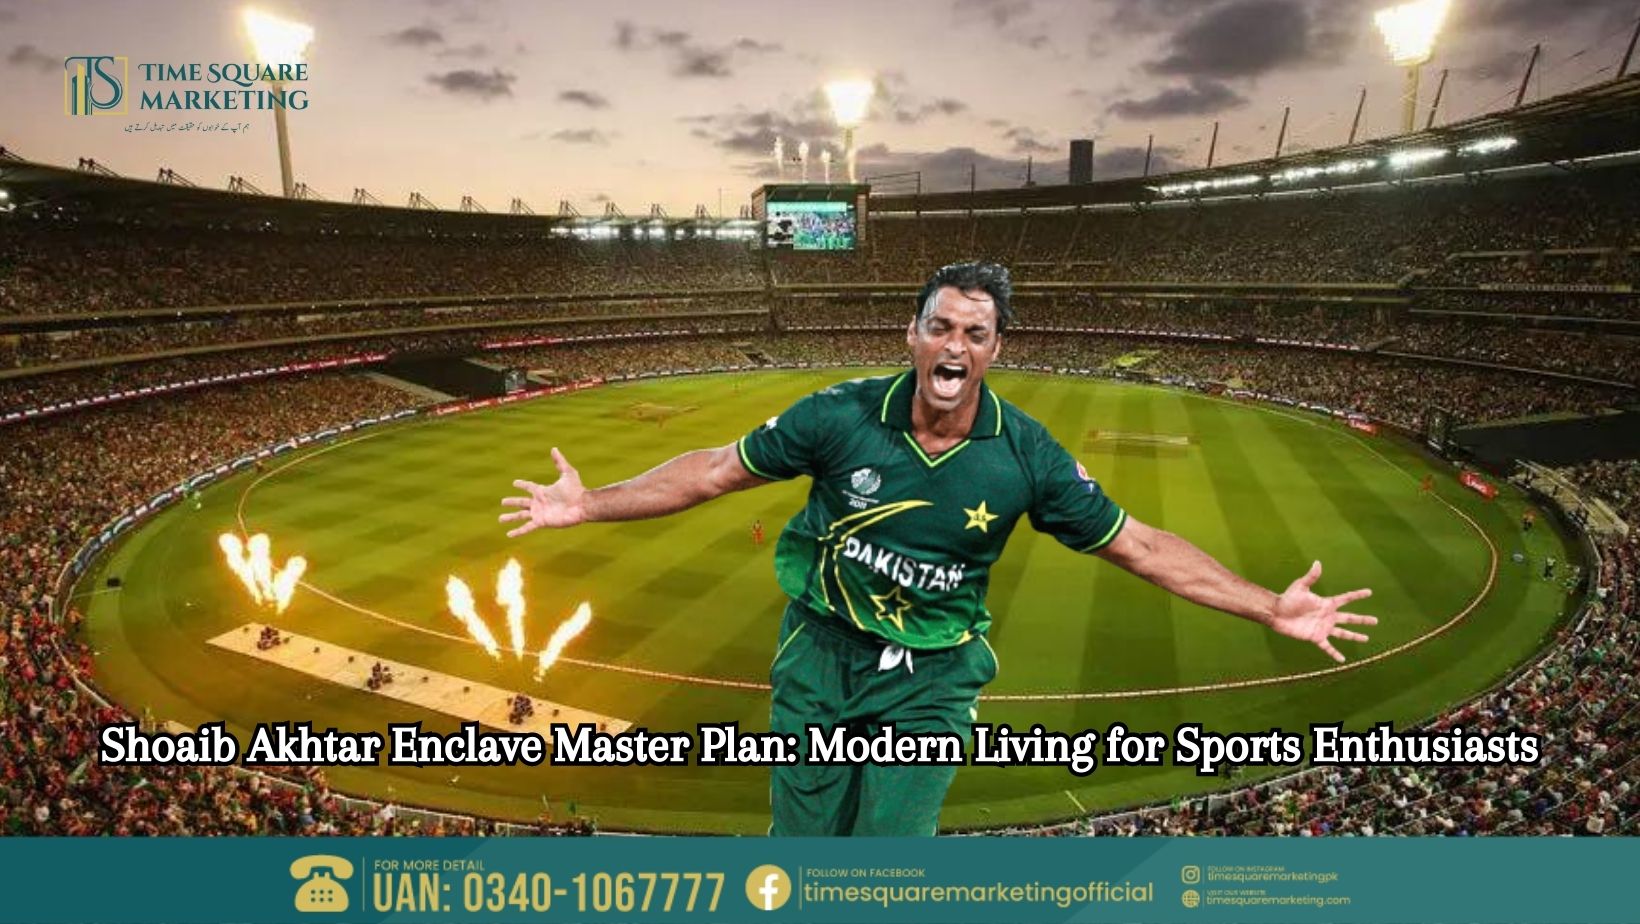 Shoaib Akhtar Enclave Master Plan Modern Living for Sports Enthusiasts